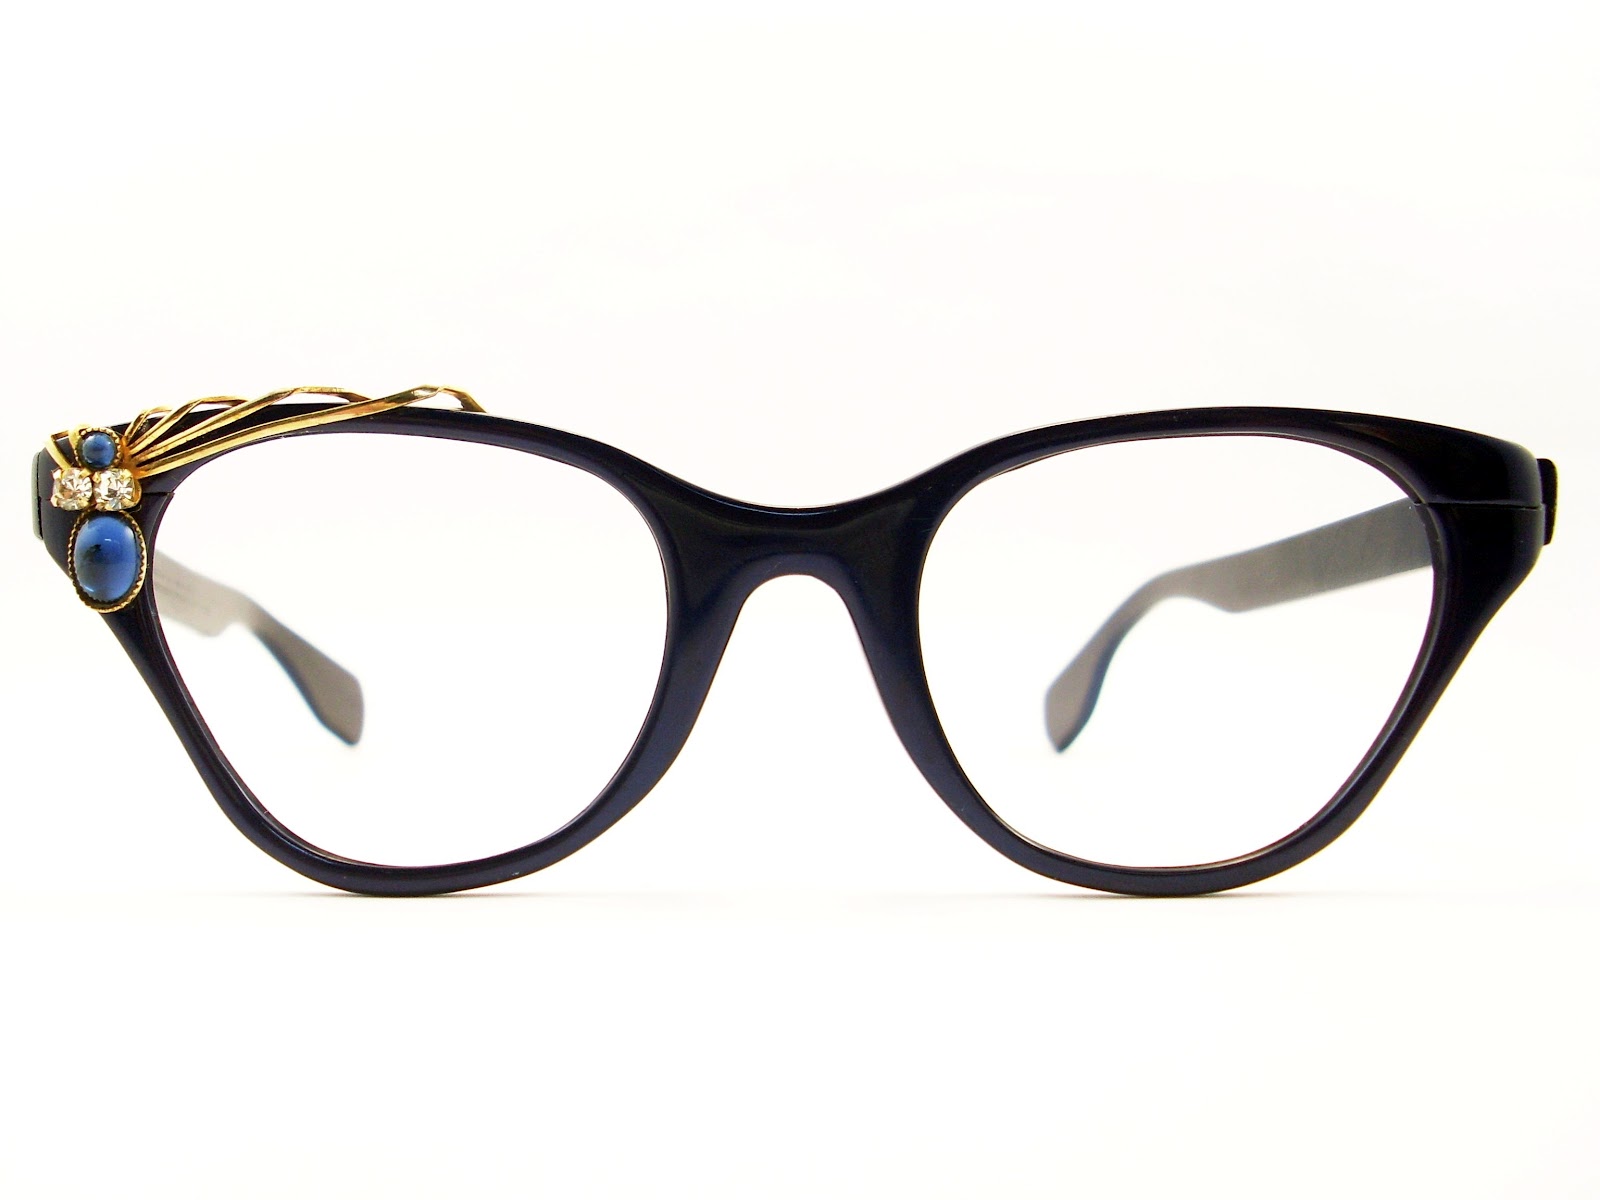 Four Trendy Eyewear Frames to Kick up Your Style - Steal ...
